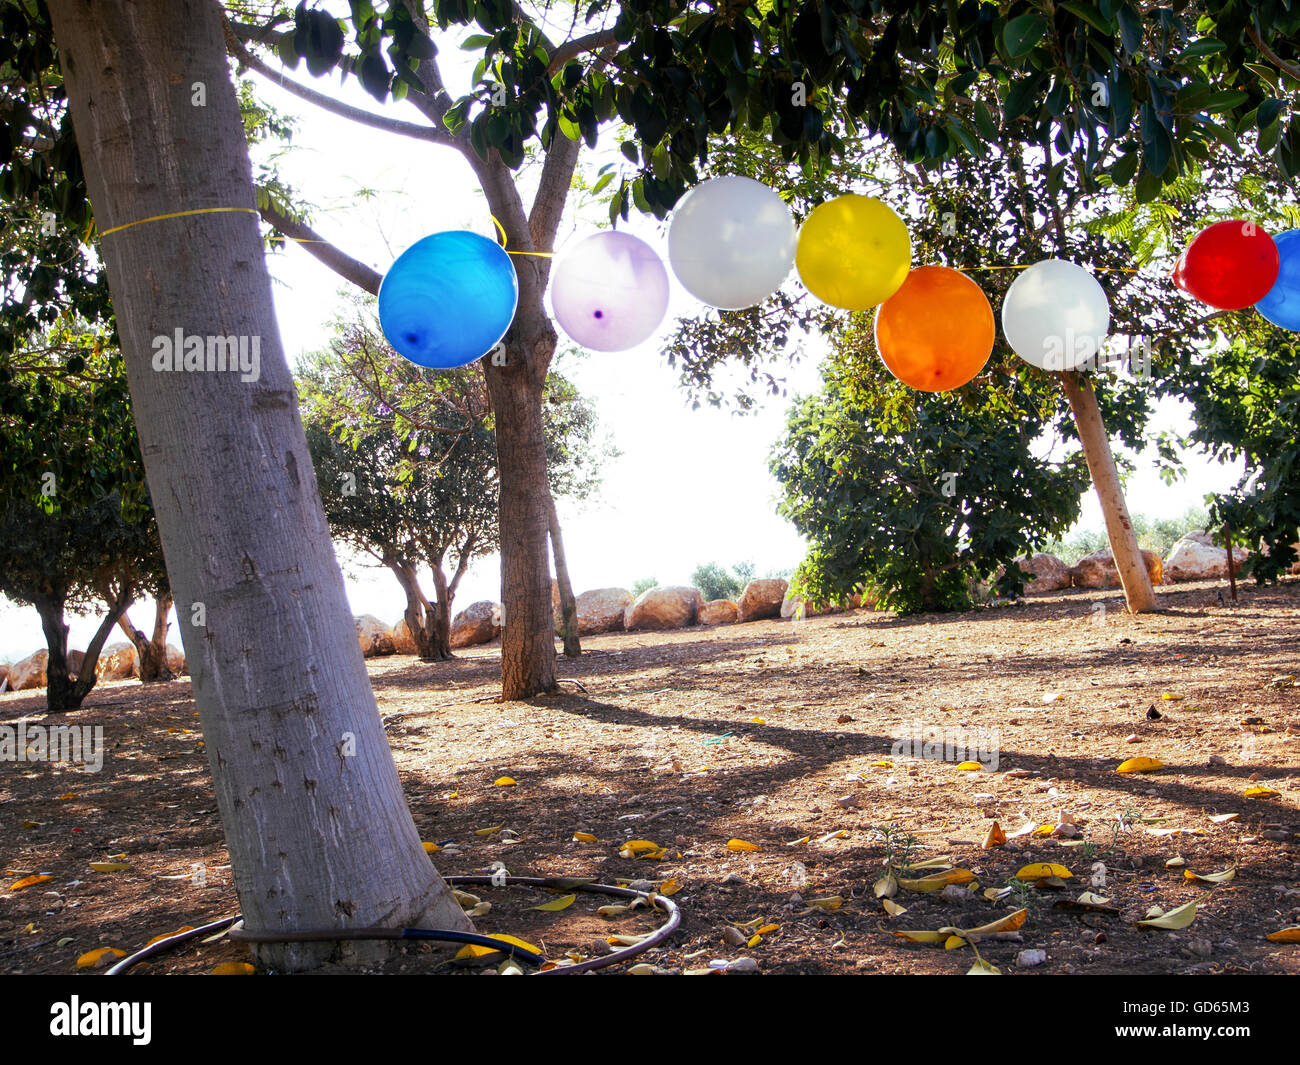 A string of balloons hangs between trees in a park for a child's birthday party Stock Photo